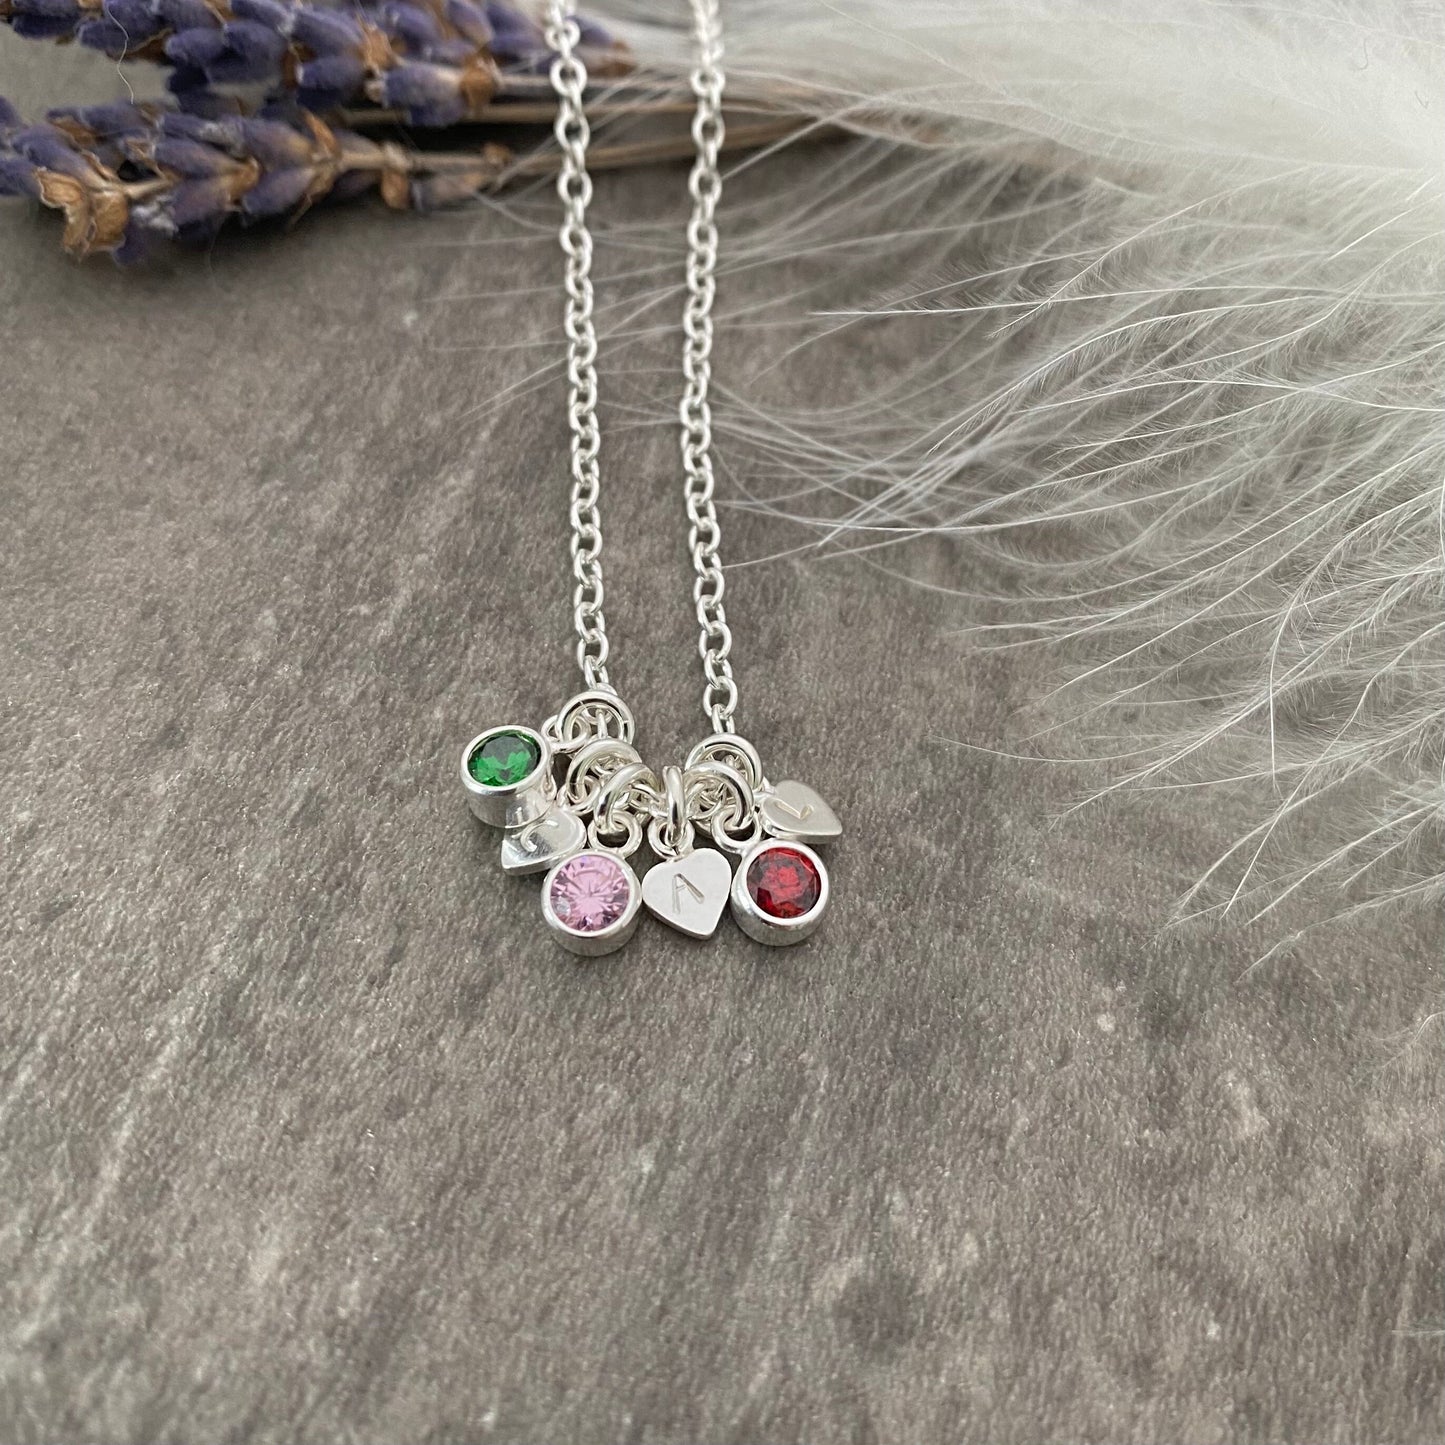 Dainty Personalised Cubic Zirconia Birthstone Charm Necklace with Initials , Sentimental Gift for Mum